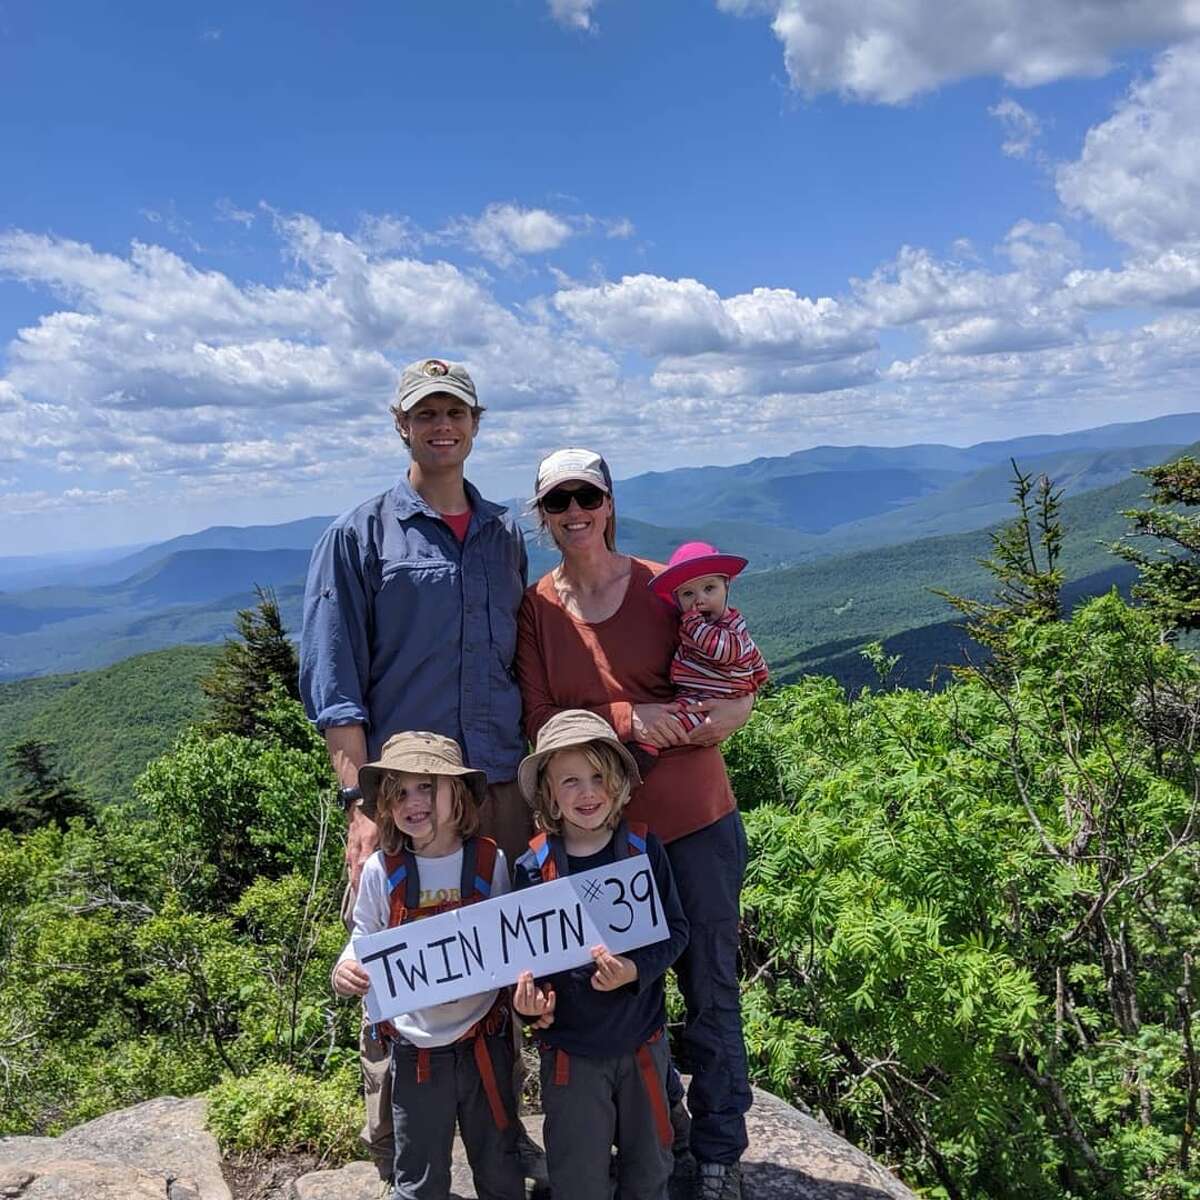 Last year, the Kralick family hiked the highest peaks of the Catskills in five months when their twin boys were four. Their baby girl rode the whole way on her mom's back. The family then summited the same peaks in winter, minus the baby in tough conditions, as they prepared to finish climbing the 46 highest Adirondacks peaks by this June. Photo: @mountainmama_amk